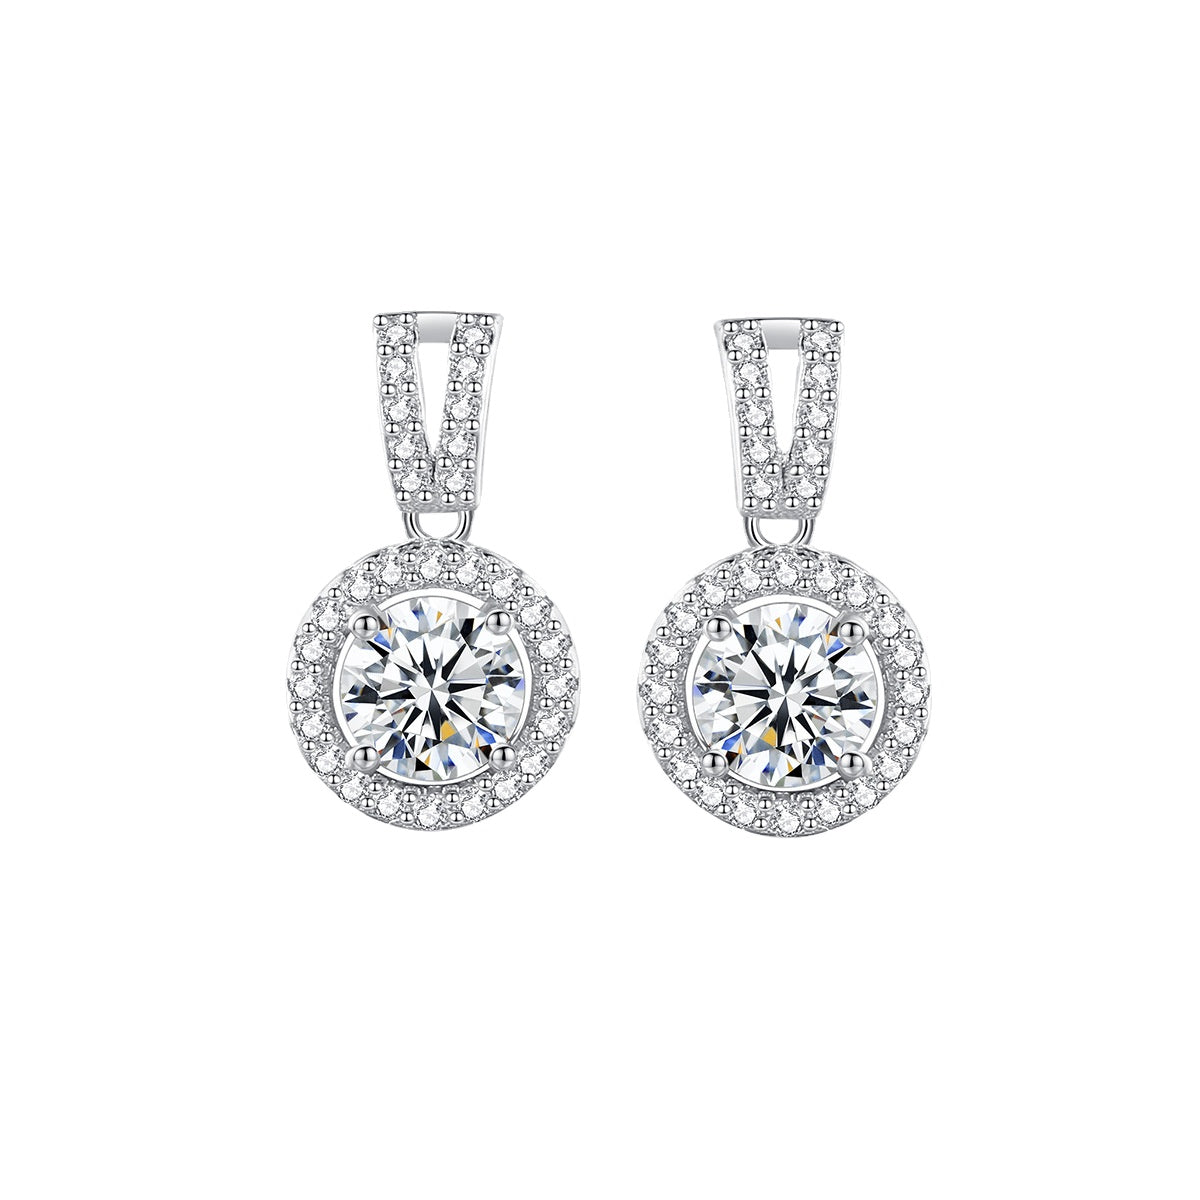 Gemstonely-Stunning S925 Silver Moissanite Stud Earrings - 5.0mm Round Sparkle with Quality